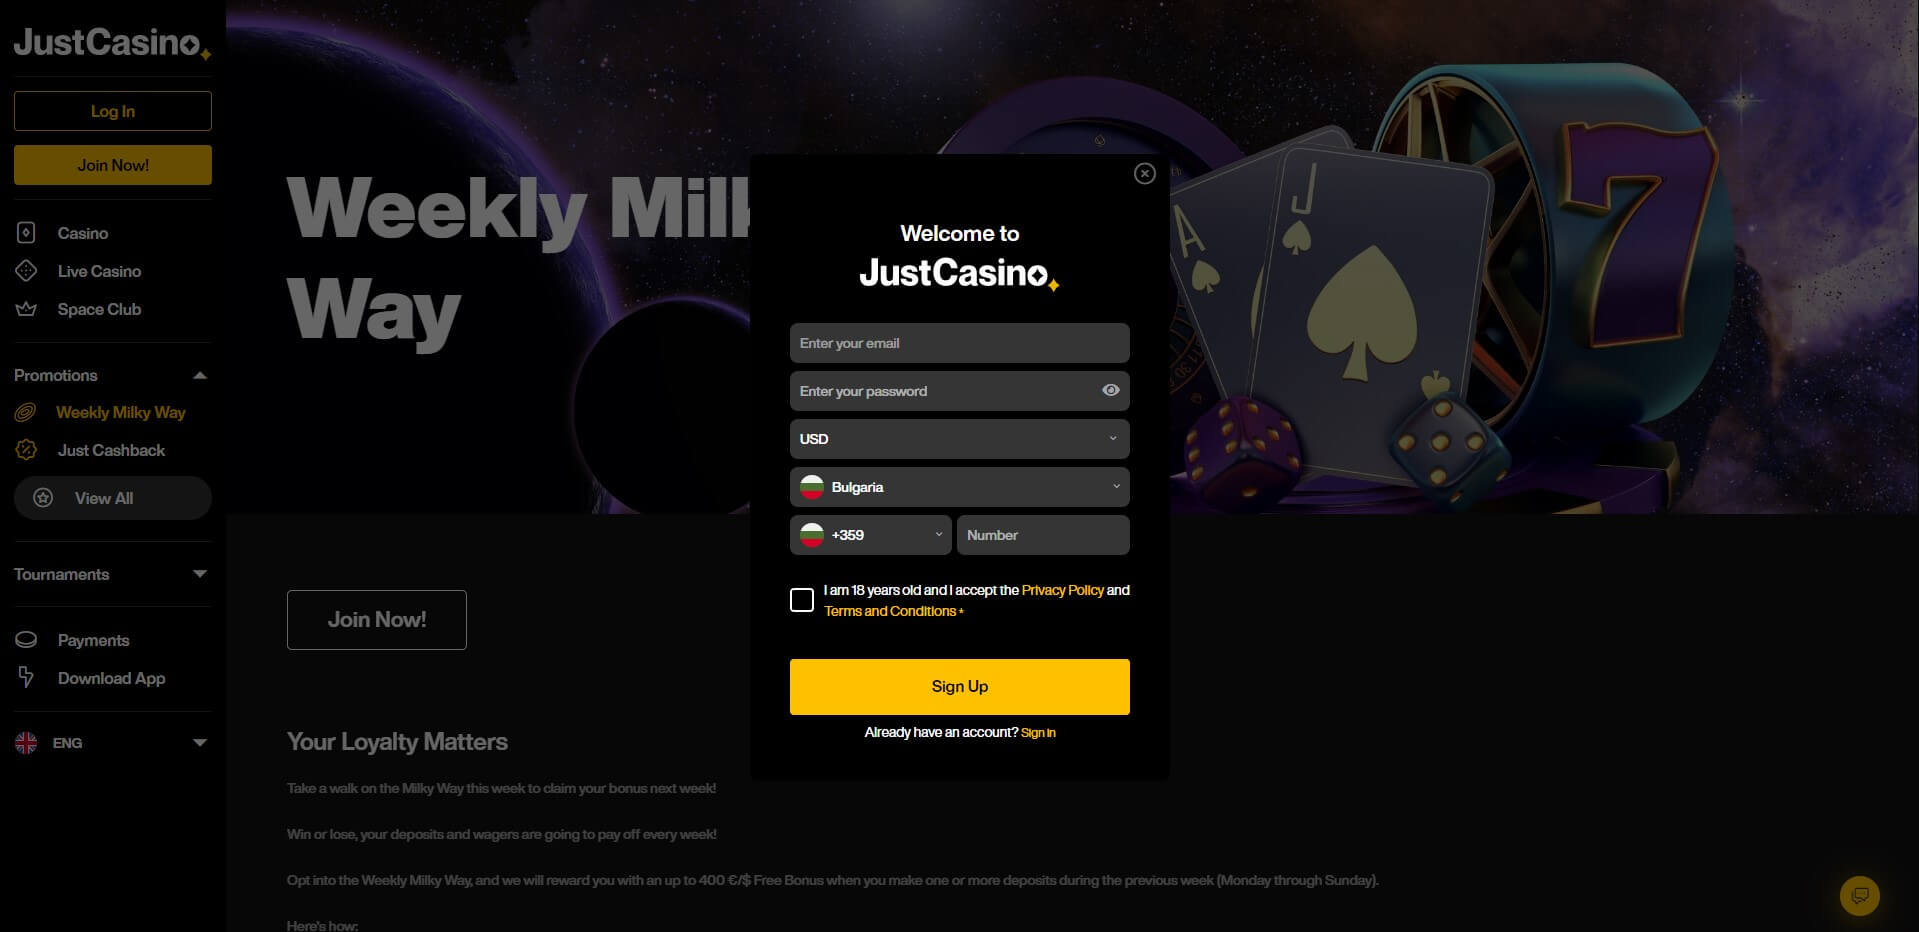 Sign Up at Just Casino